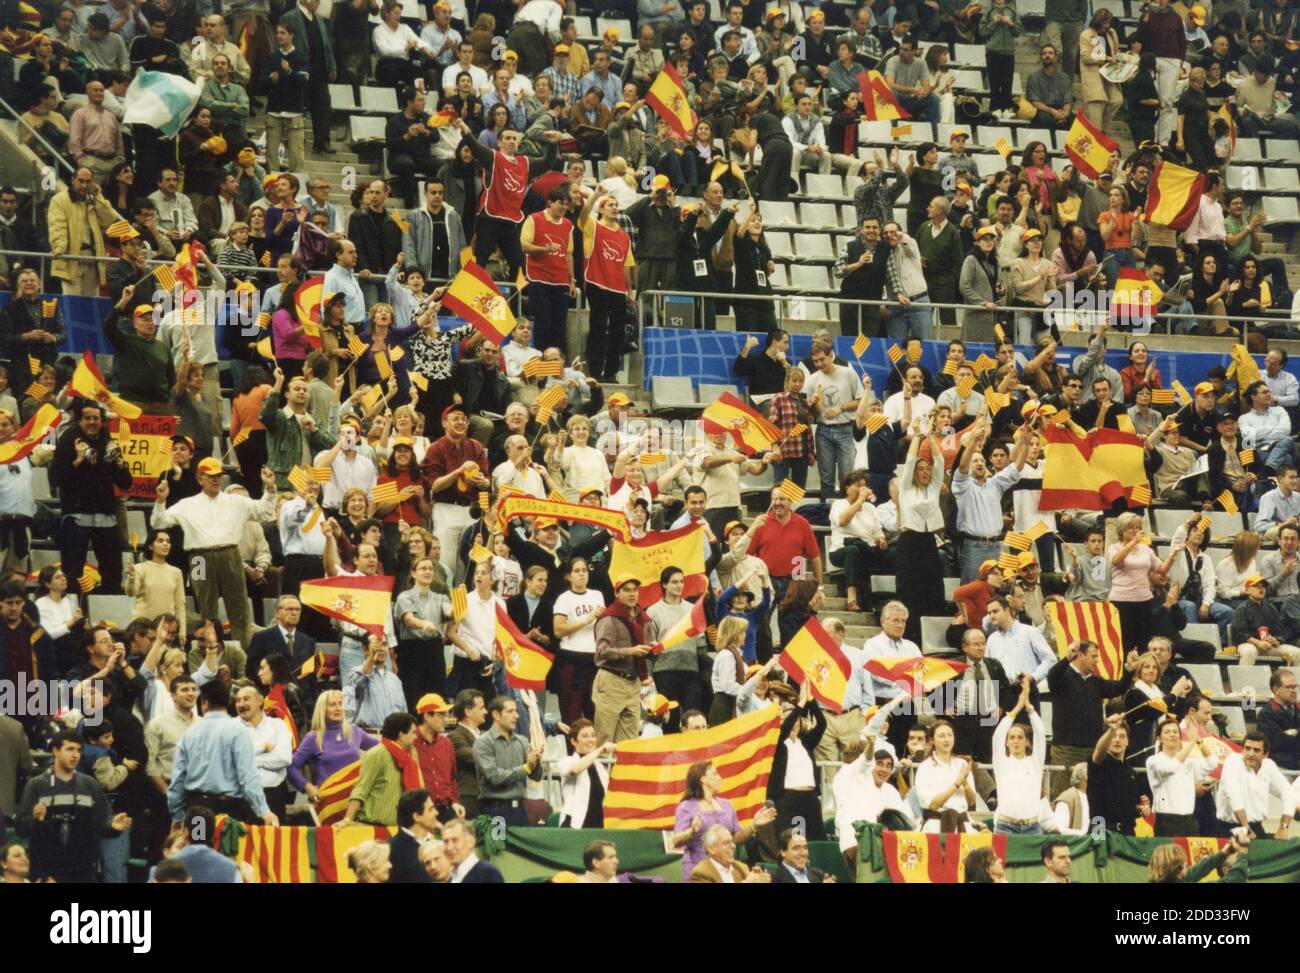 Spanish supporters watching the Davis Cup final, Barcelona, Spain 2000 Stock Photo